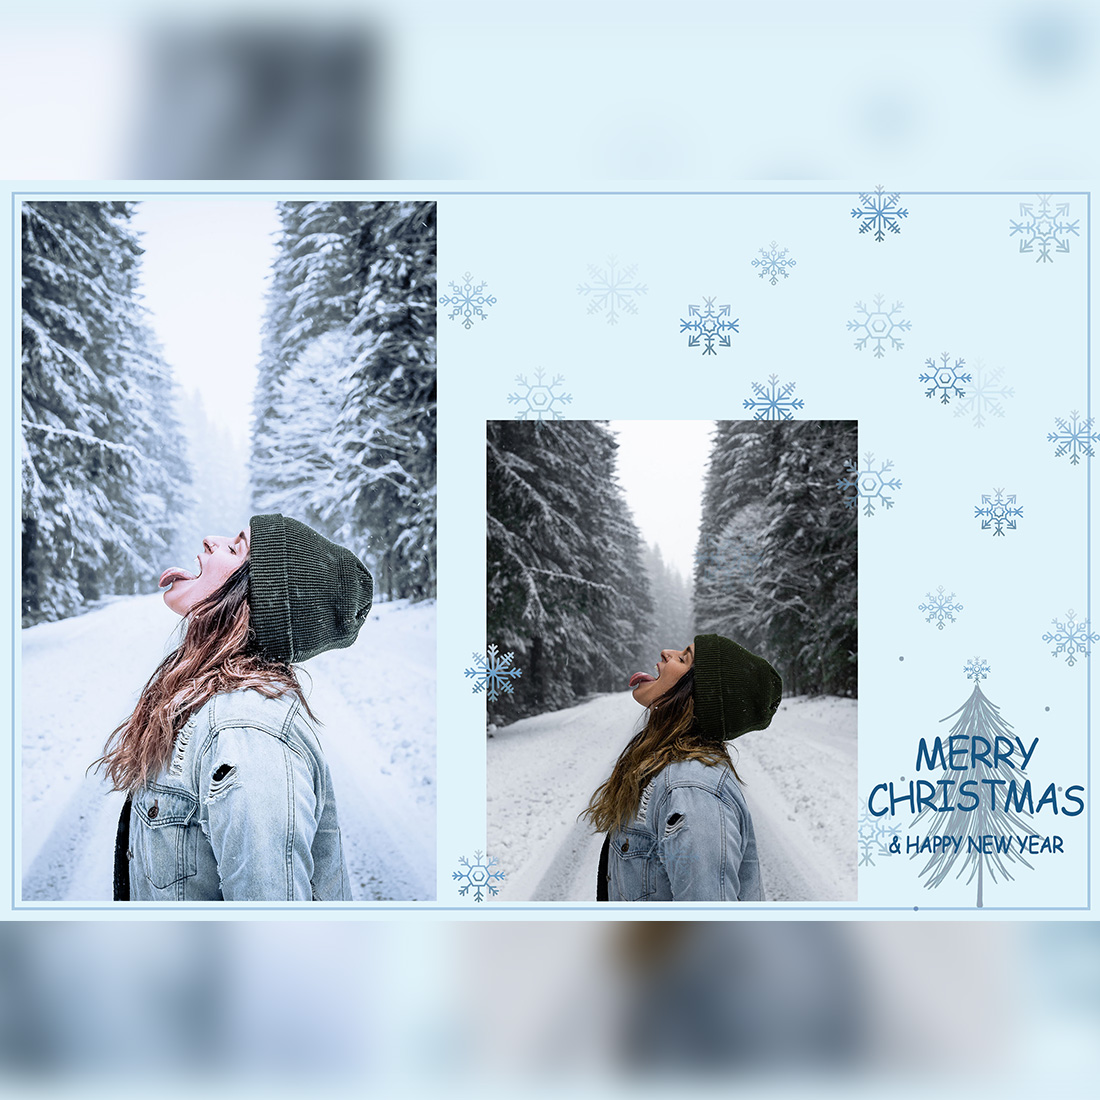 12 Photoshop Actions, Cute Winter Ps Action, Snow ACR Preset, Christmas Ps Filter, Atn Portrait And Lifestyle Theme For Instagram, Blogger preview image.